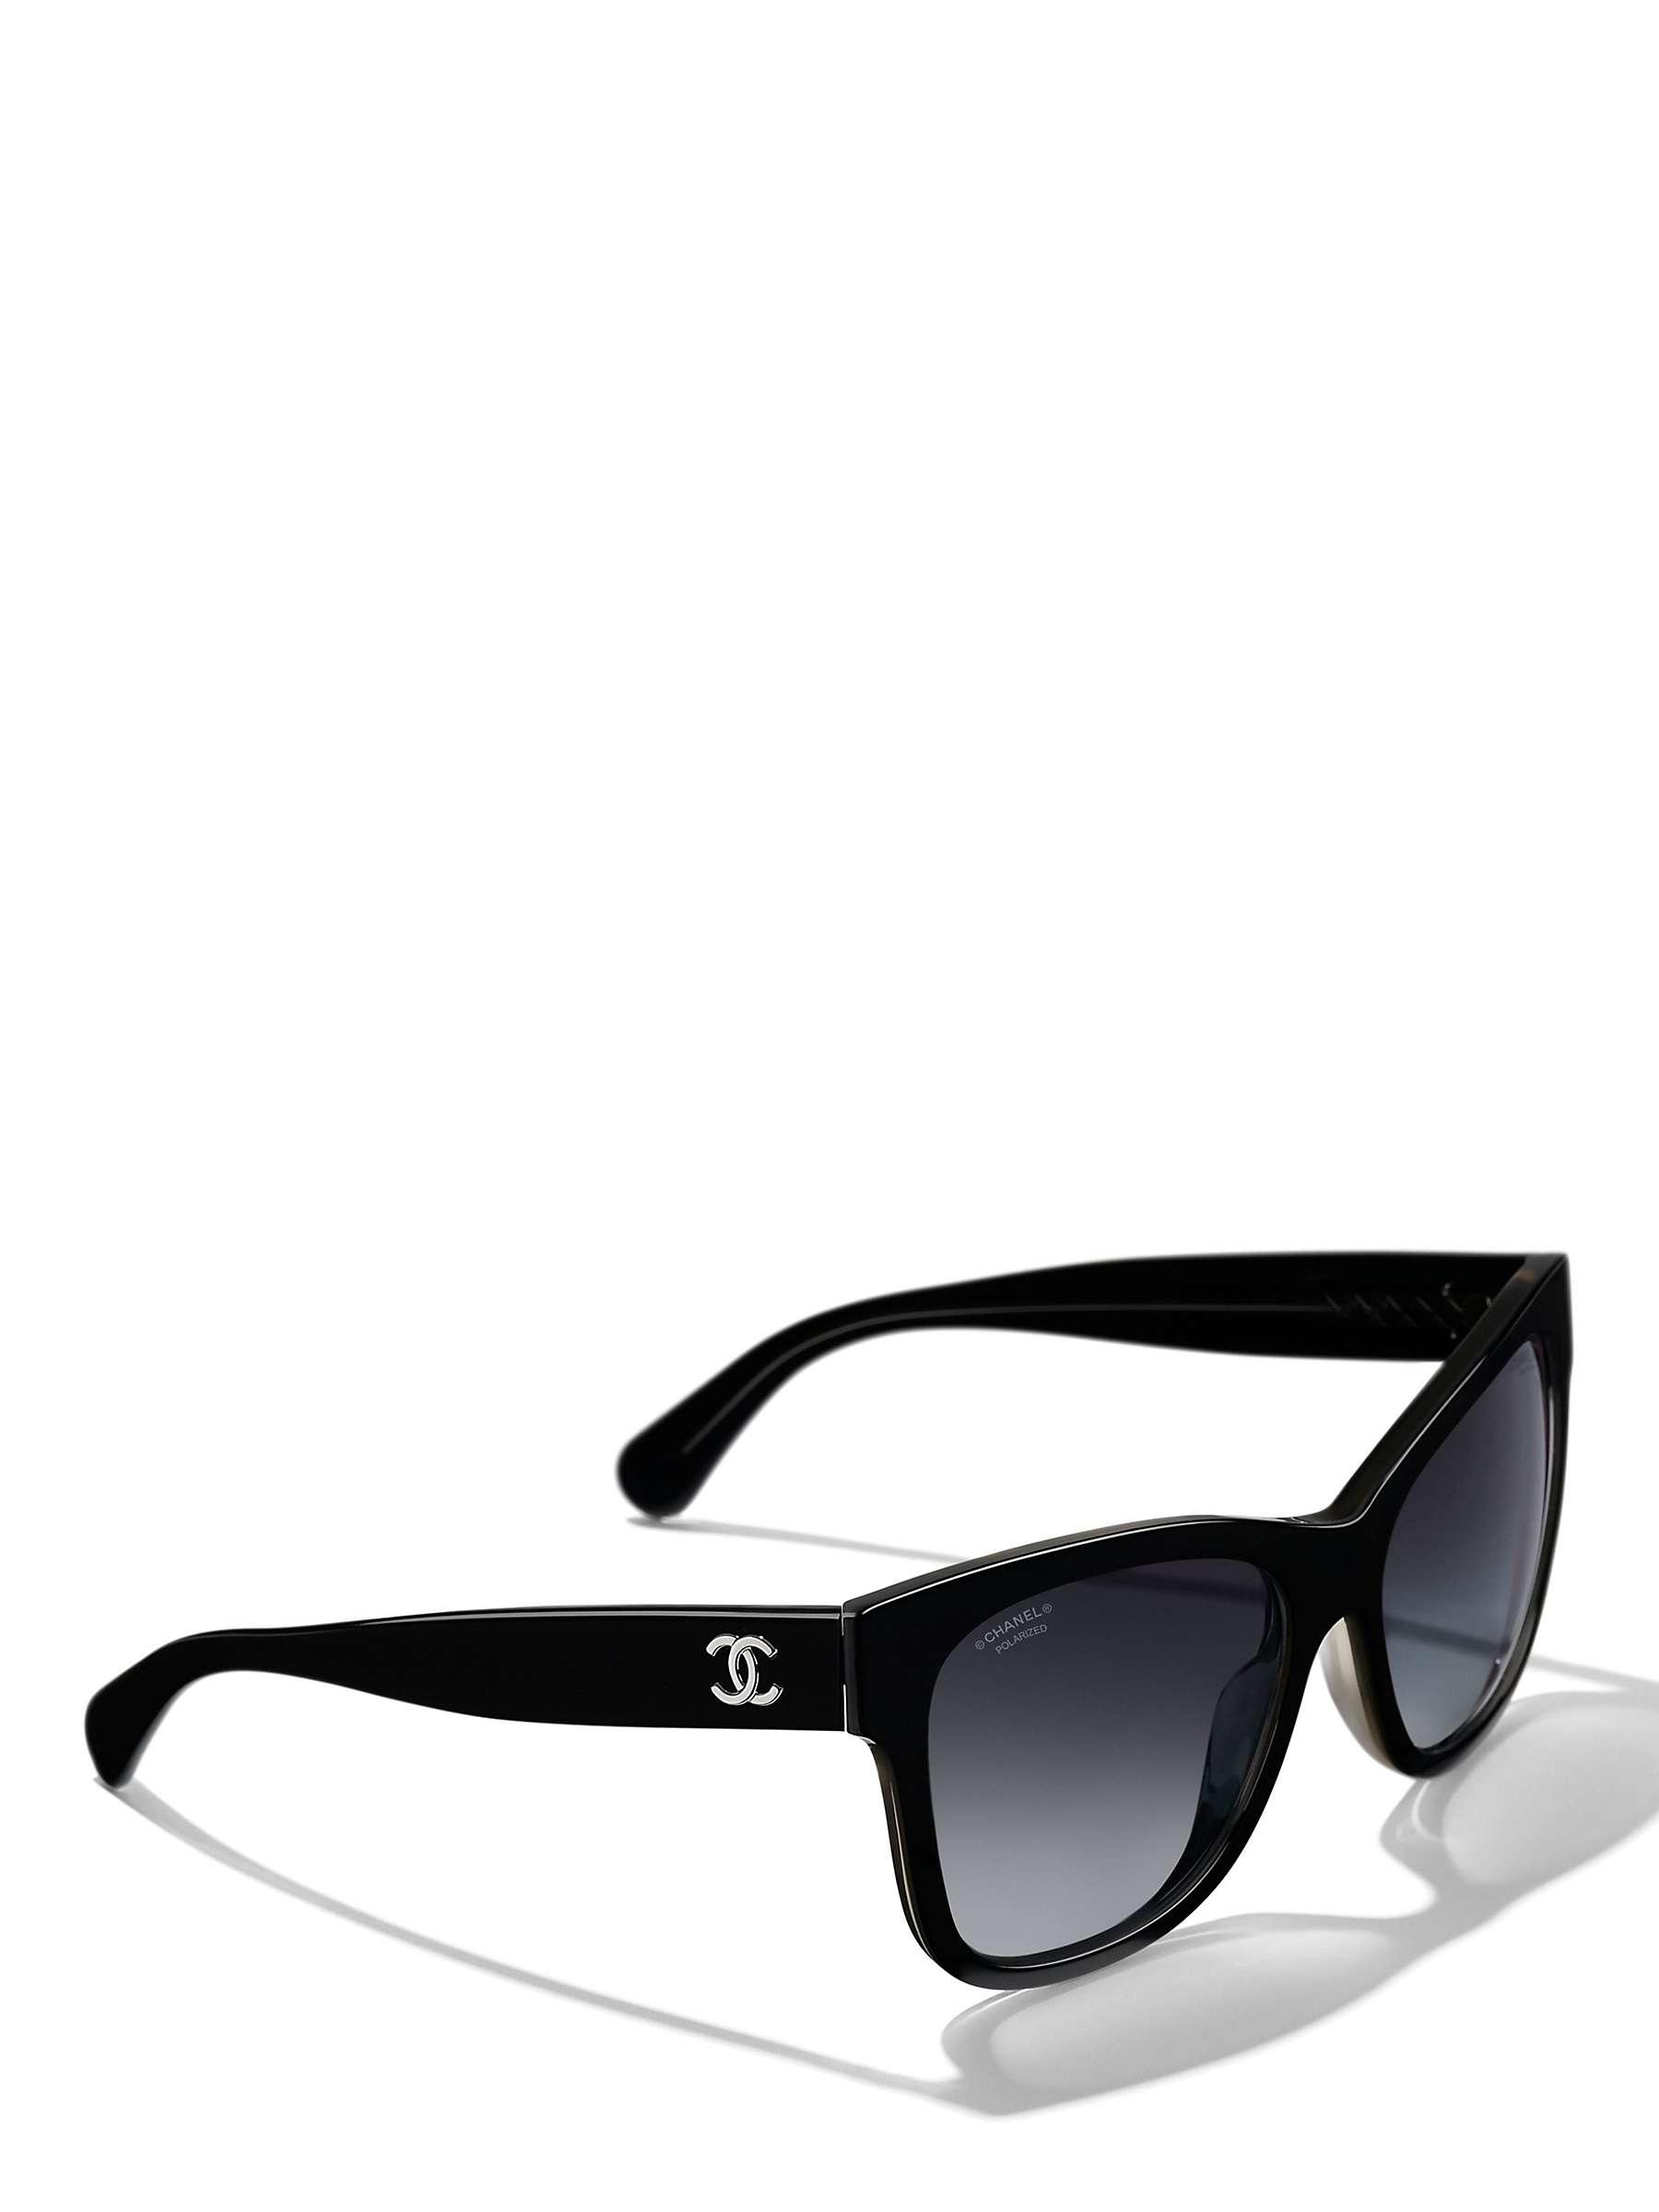 Buy CHANEL Square Sunglasses CH5380 Black Online at johnlewis.com